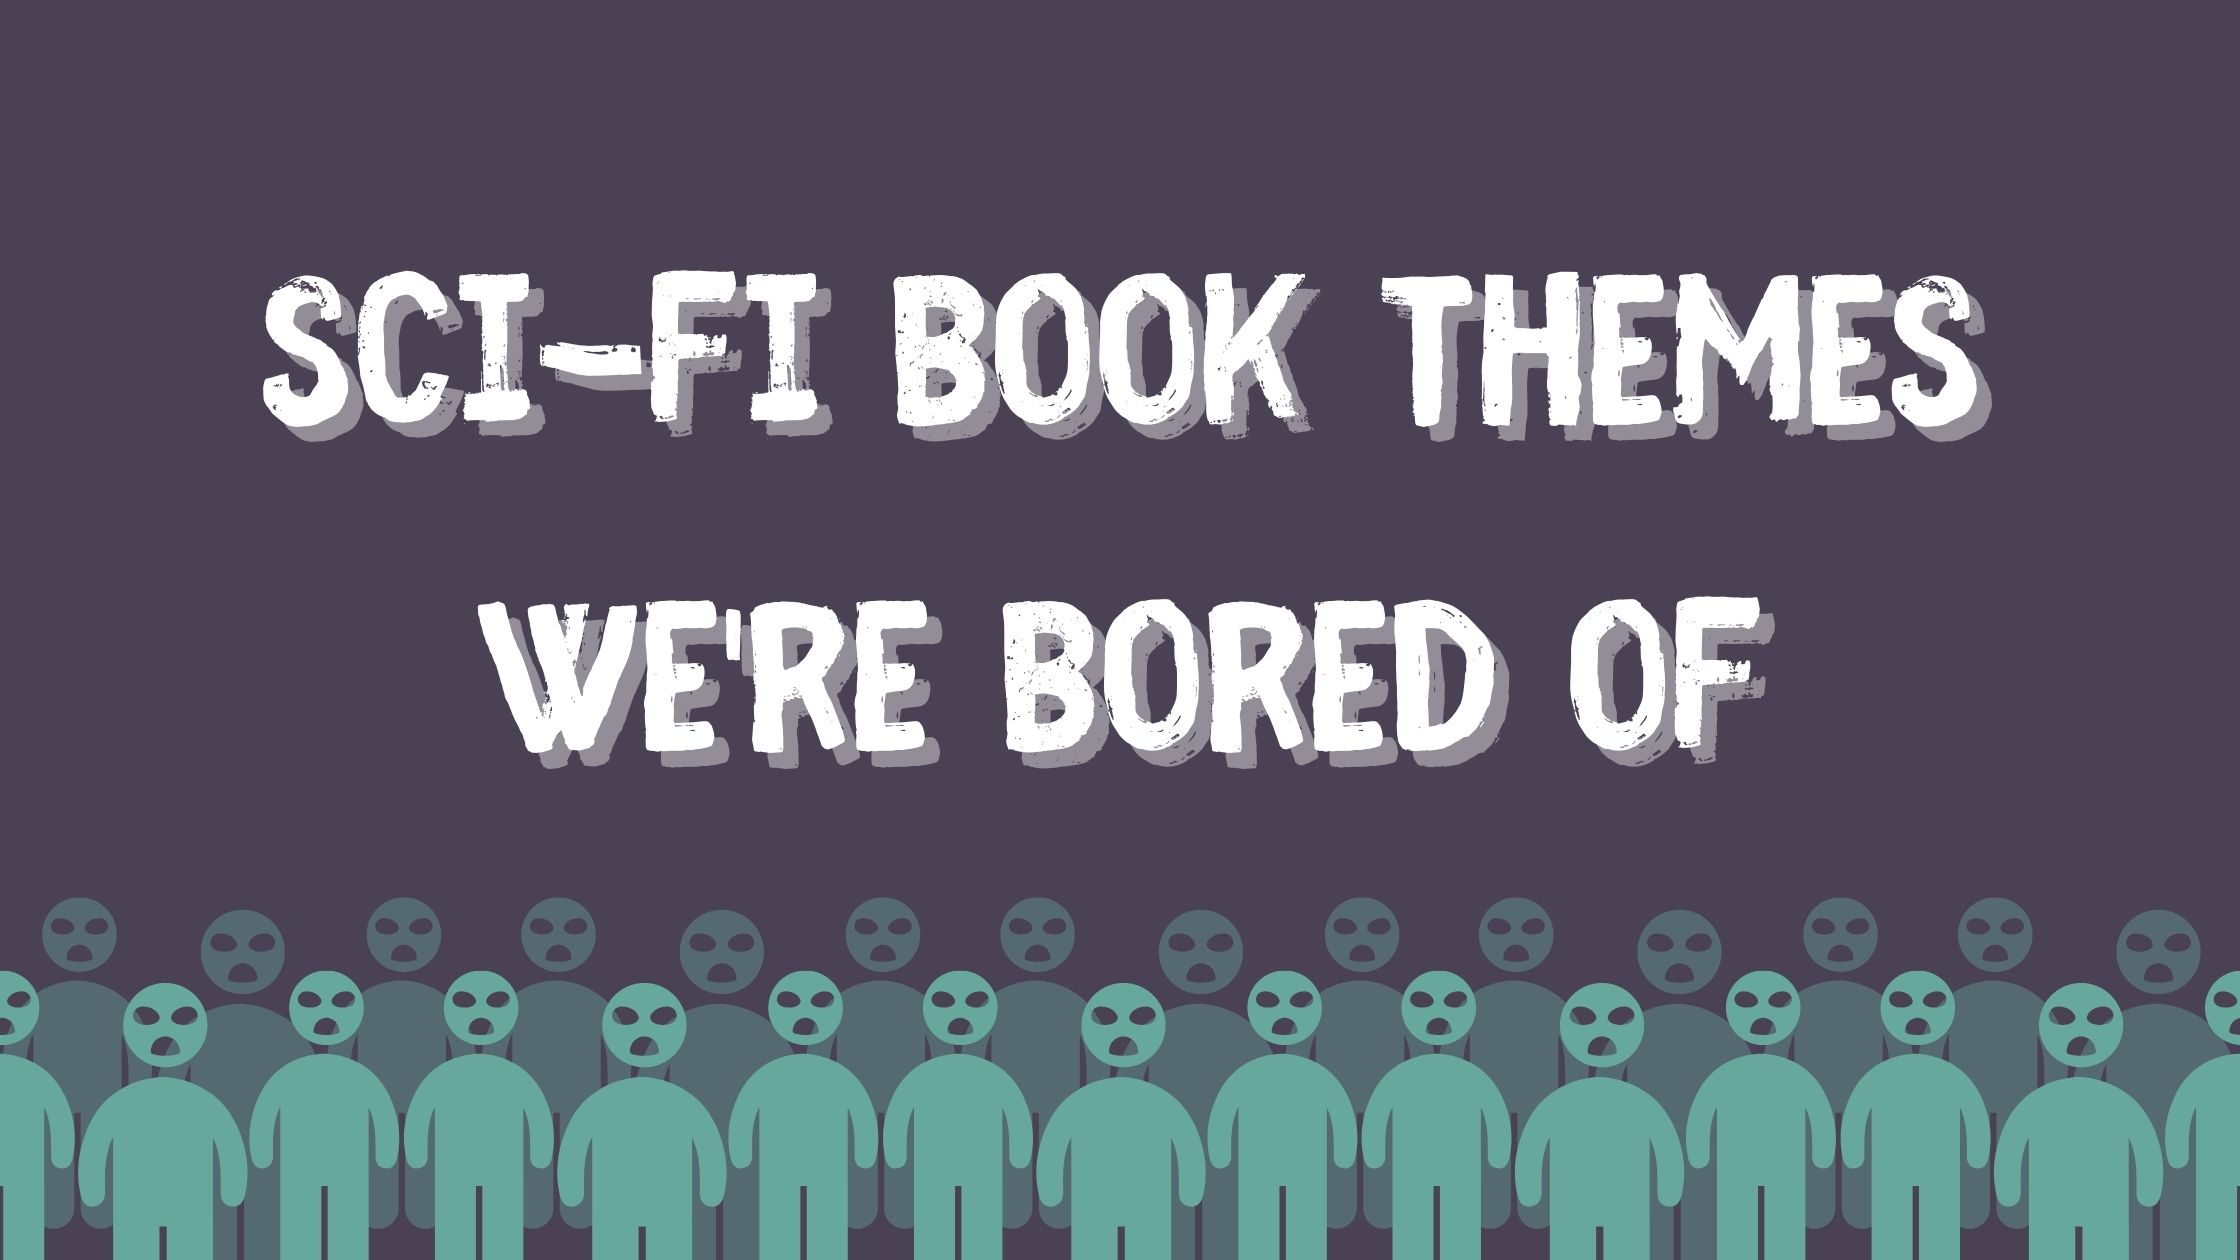 Sci-fi book themes we’re bored of